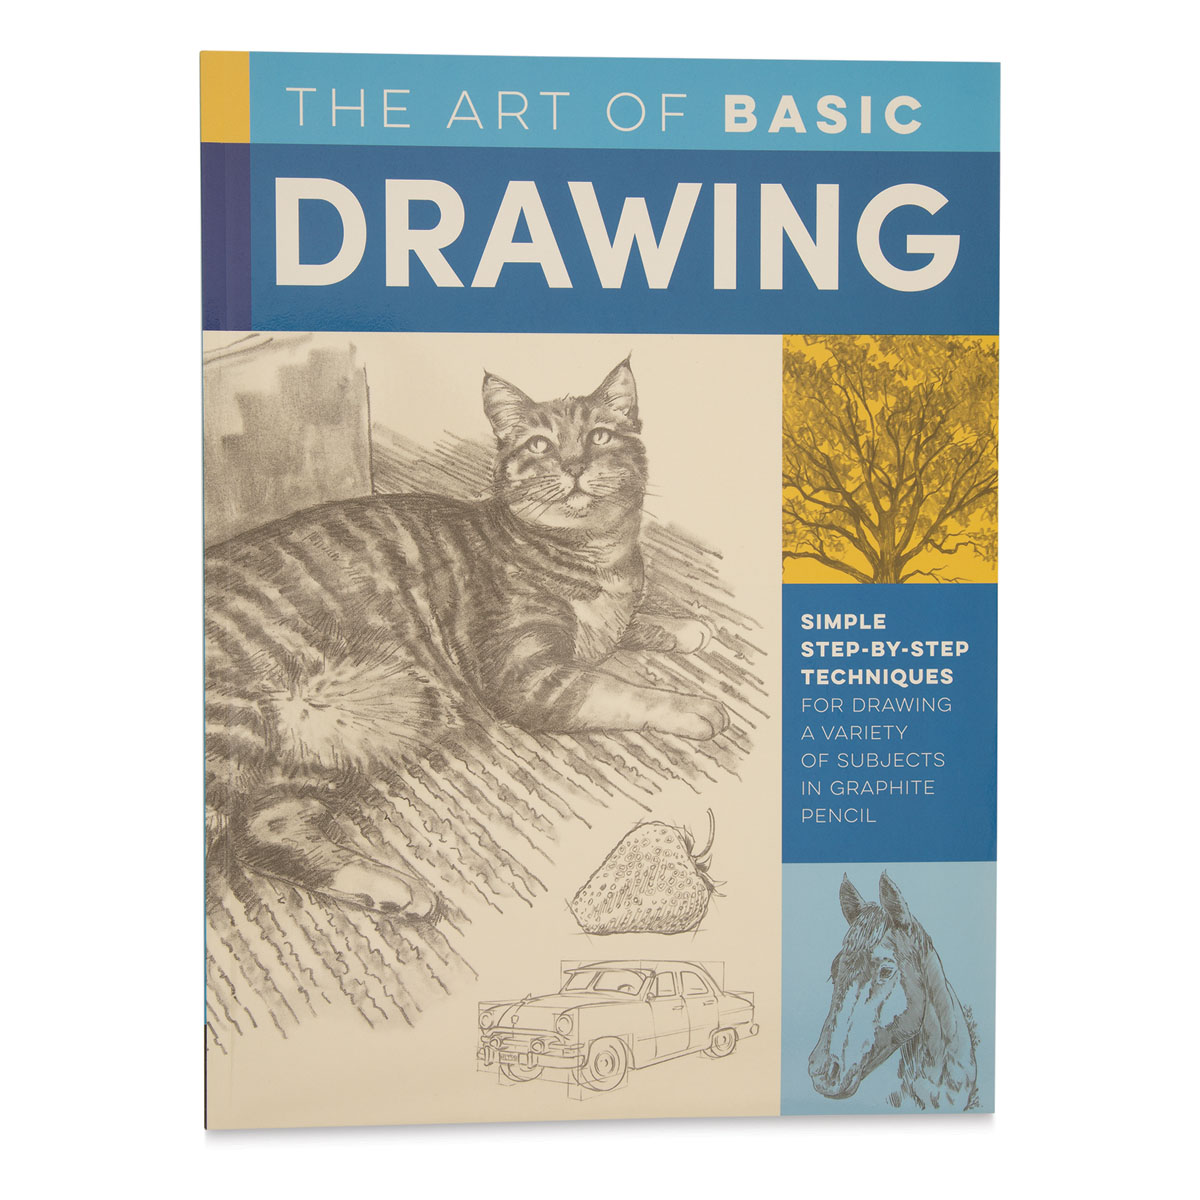 The Art of Basic Drawing: Simple Step-by-step Techniques